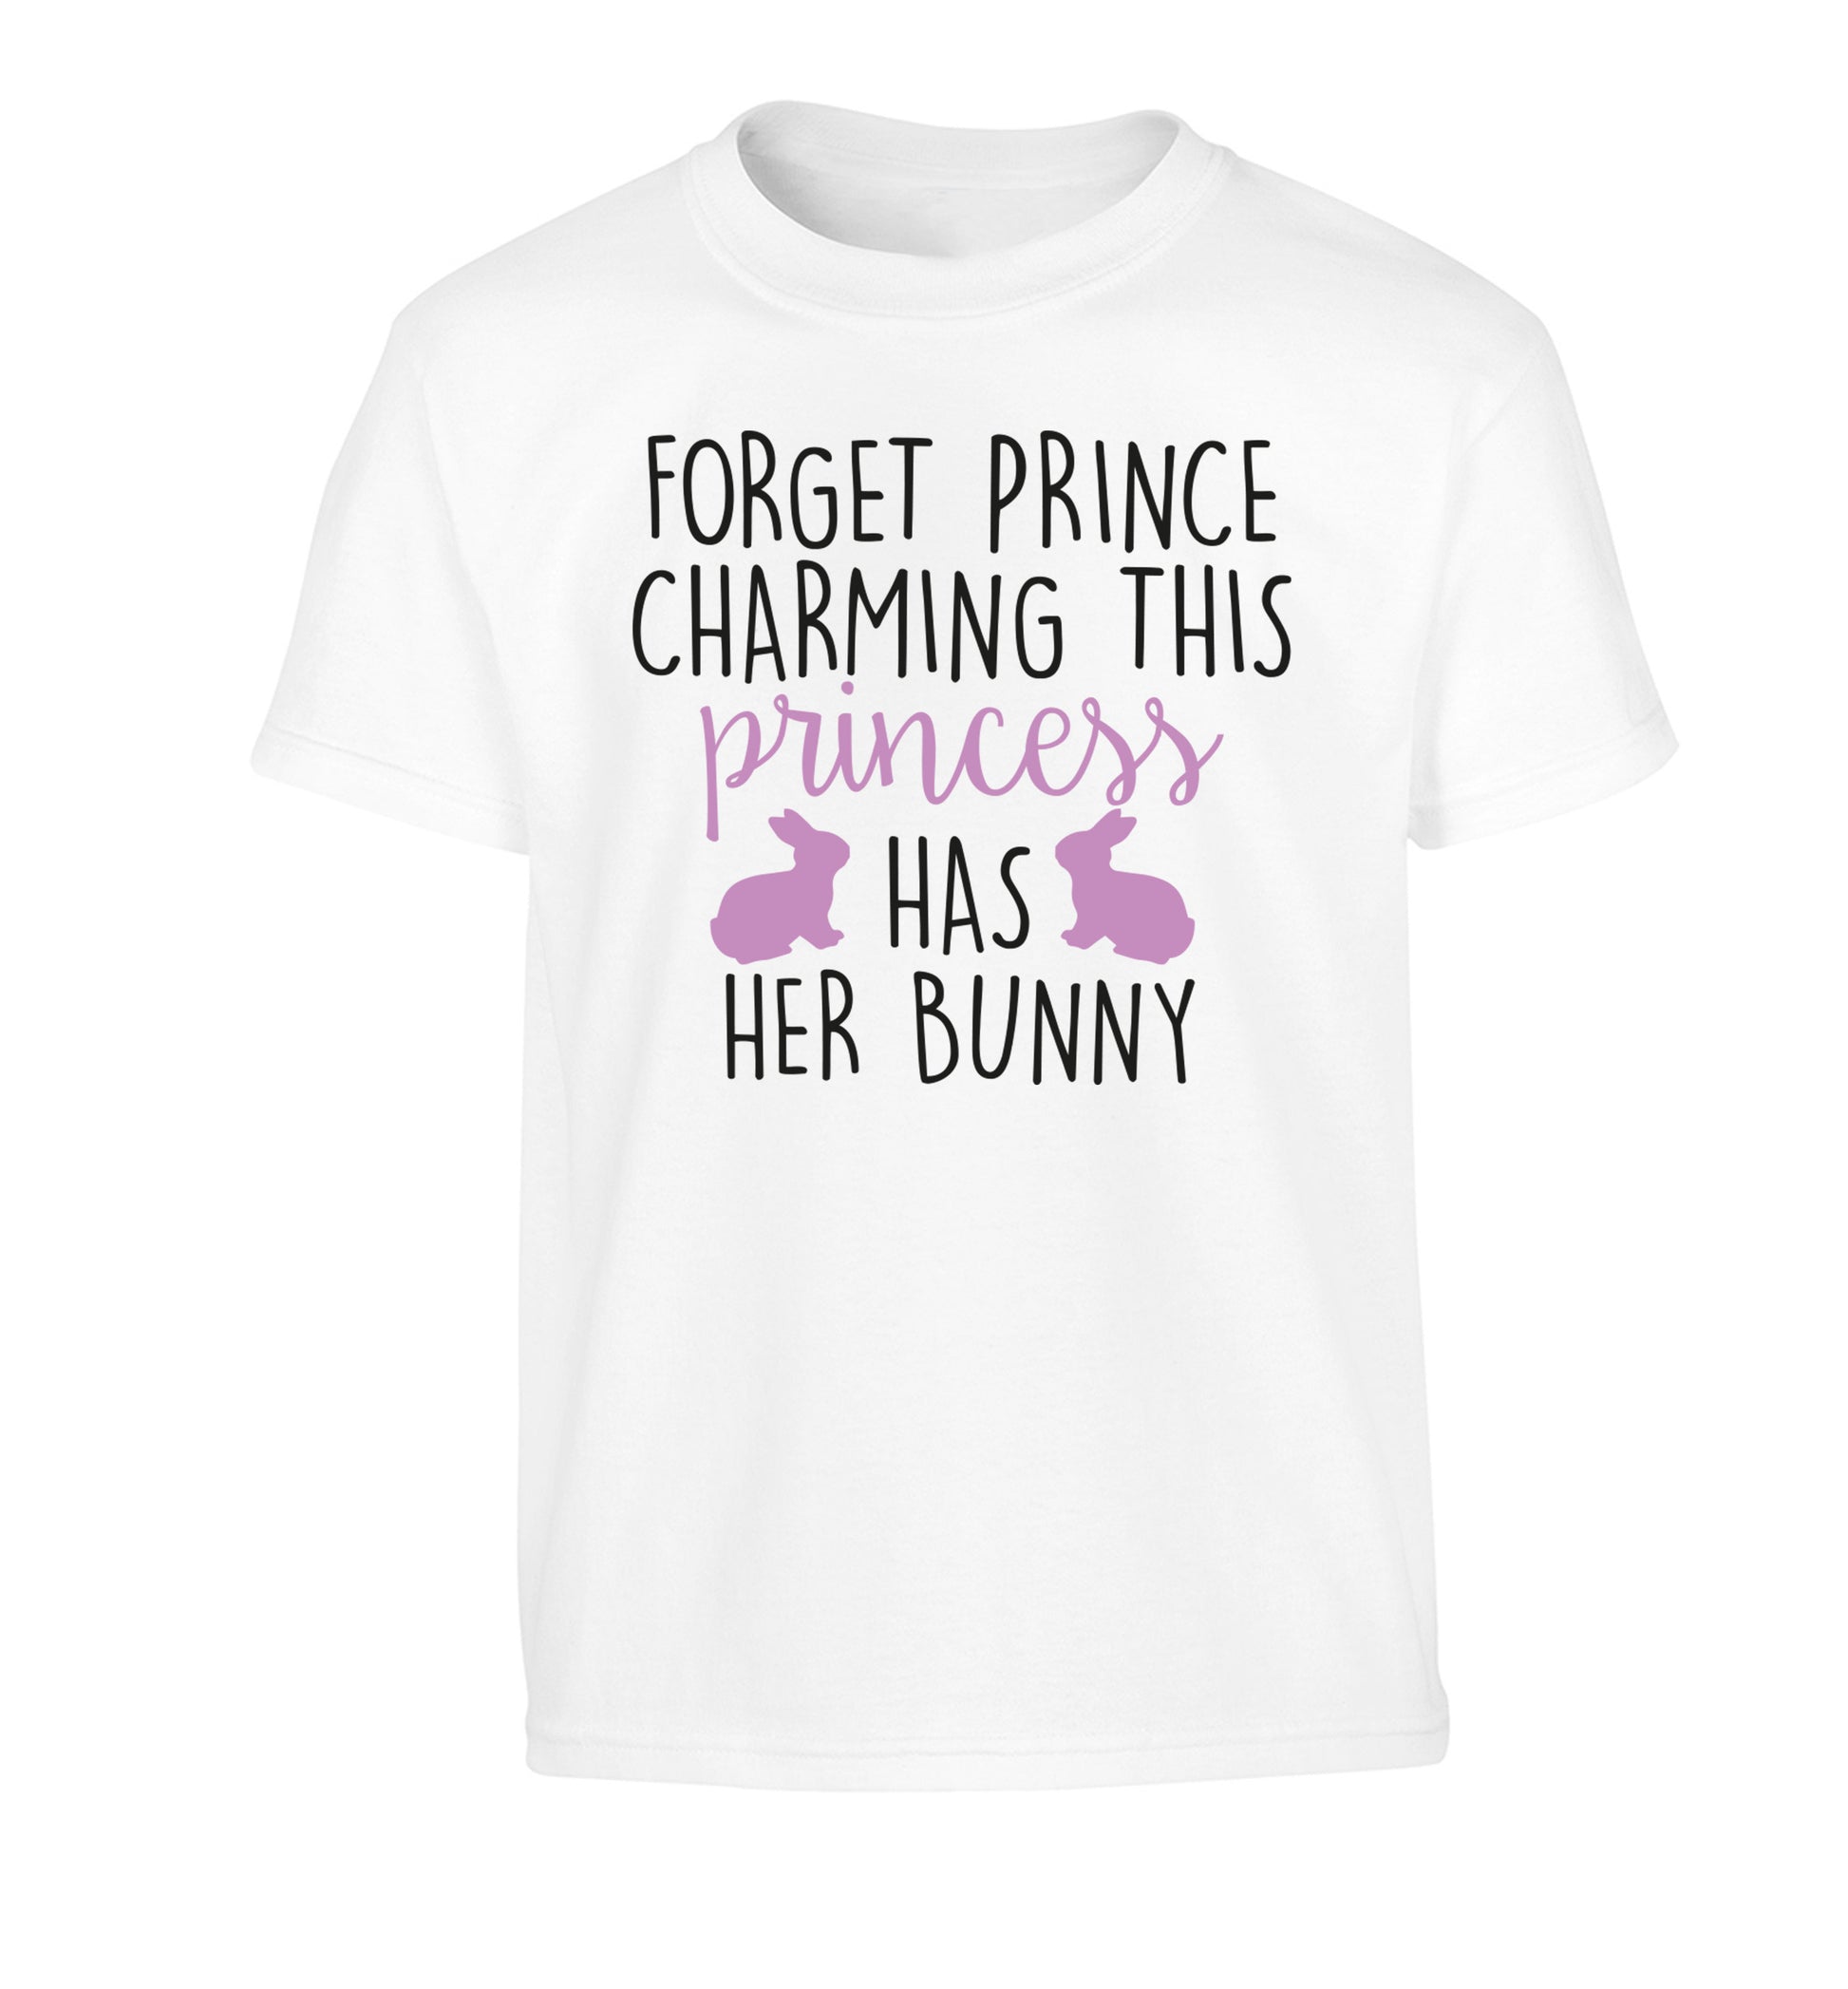 Forget prince charming this princess has her bunny Children's white Tshirt 12-14 Years